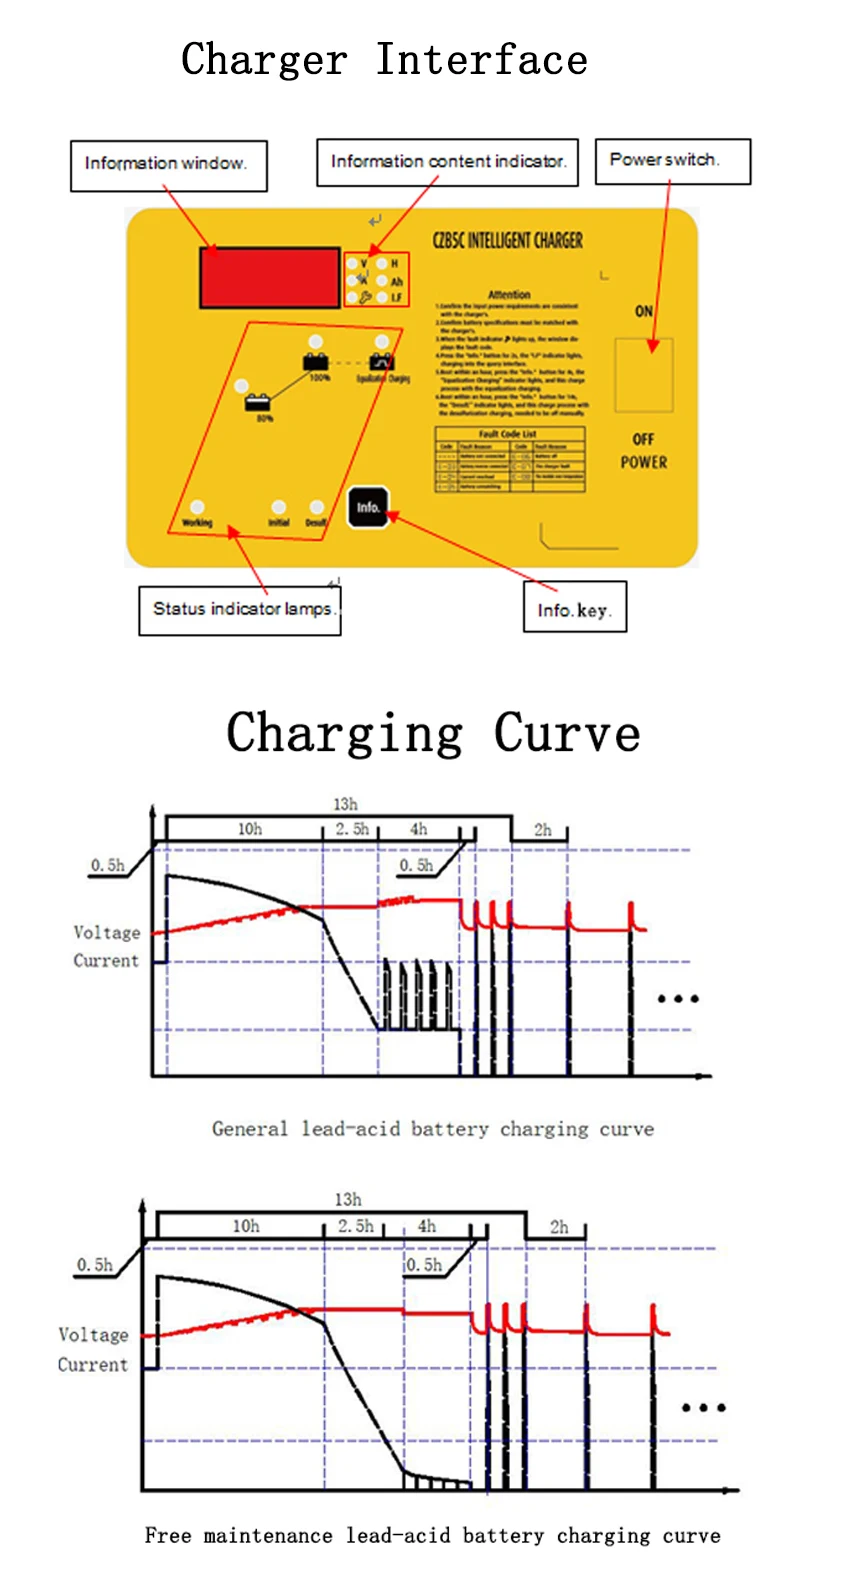 Shineng Industrial 96v Forklift Battery Charger 30a Smart Charger View 96v Forklift Smart Charger Shineng Product Details From Shanghai Shineng Electrical Equipment Co Ltd On Alibaba Com